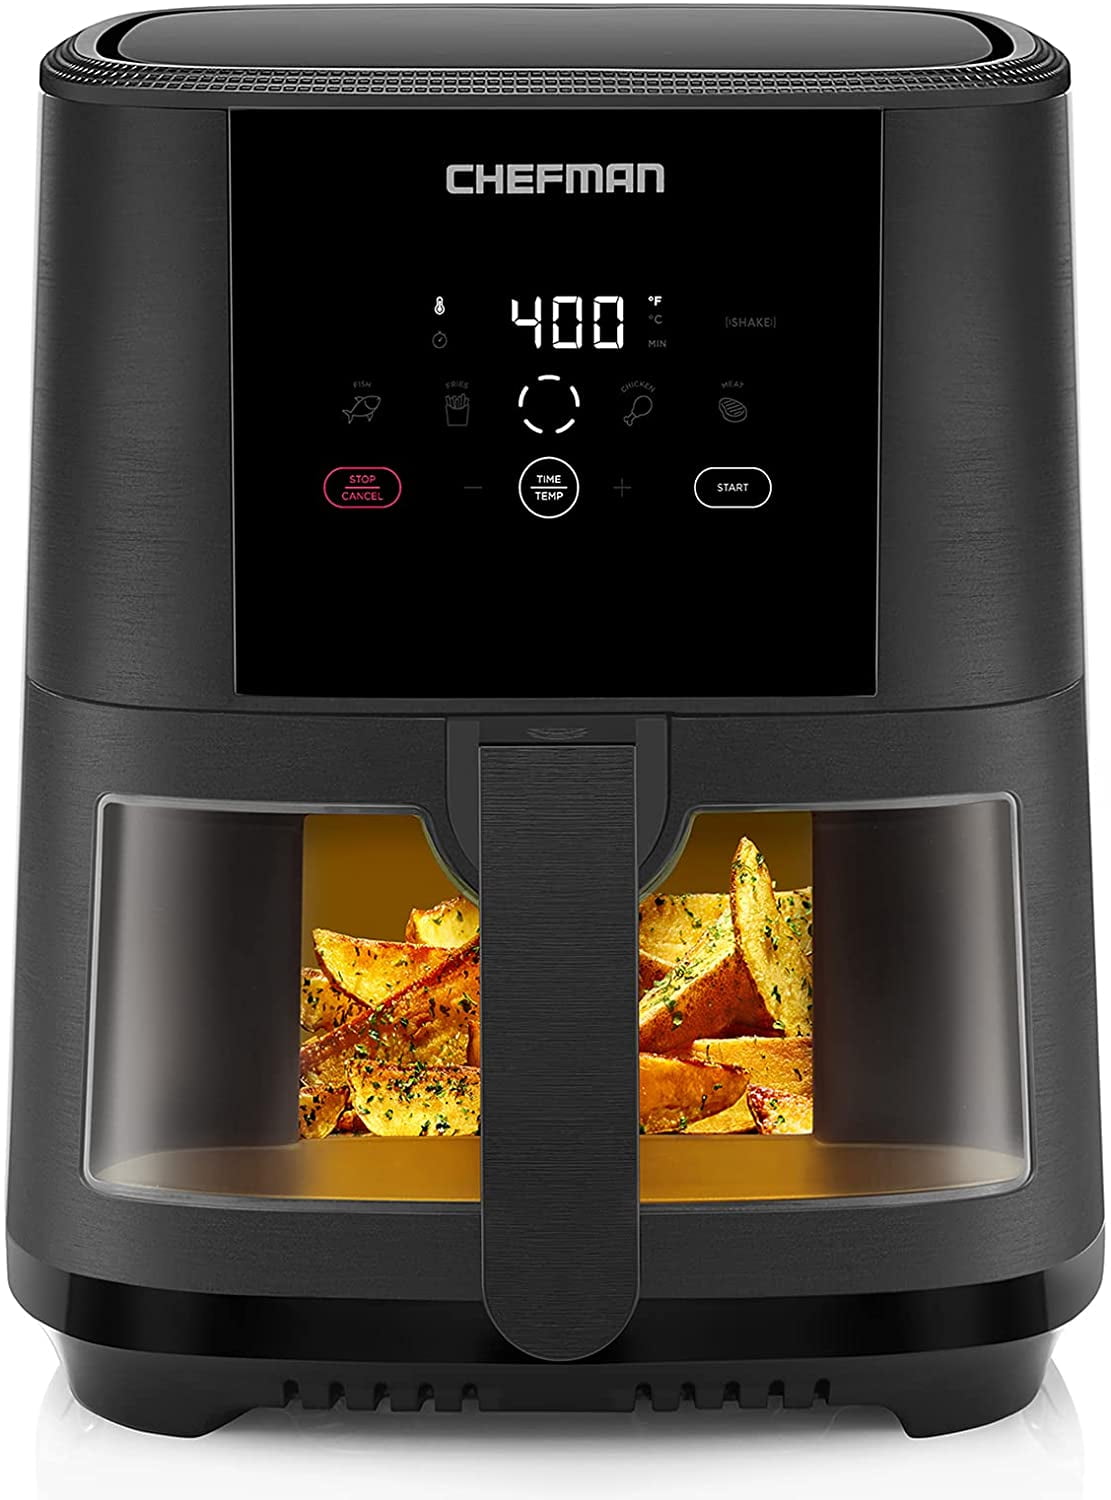 Chefman TurboTouch Air Fryer, One-Touch Digital Control, Shake